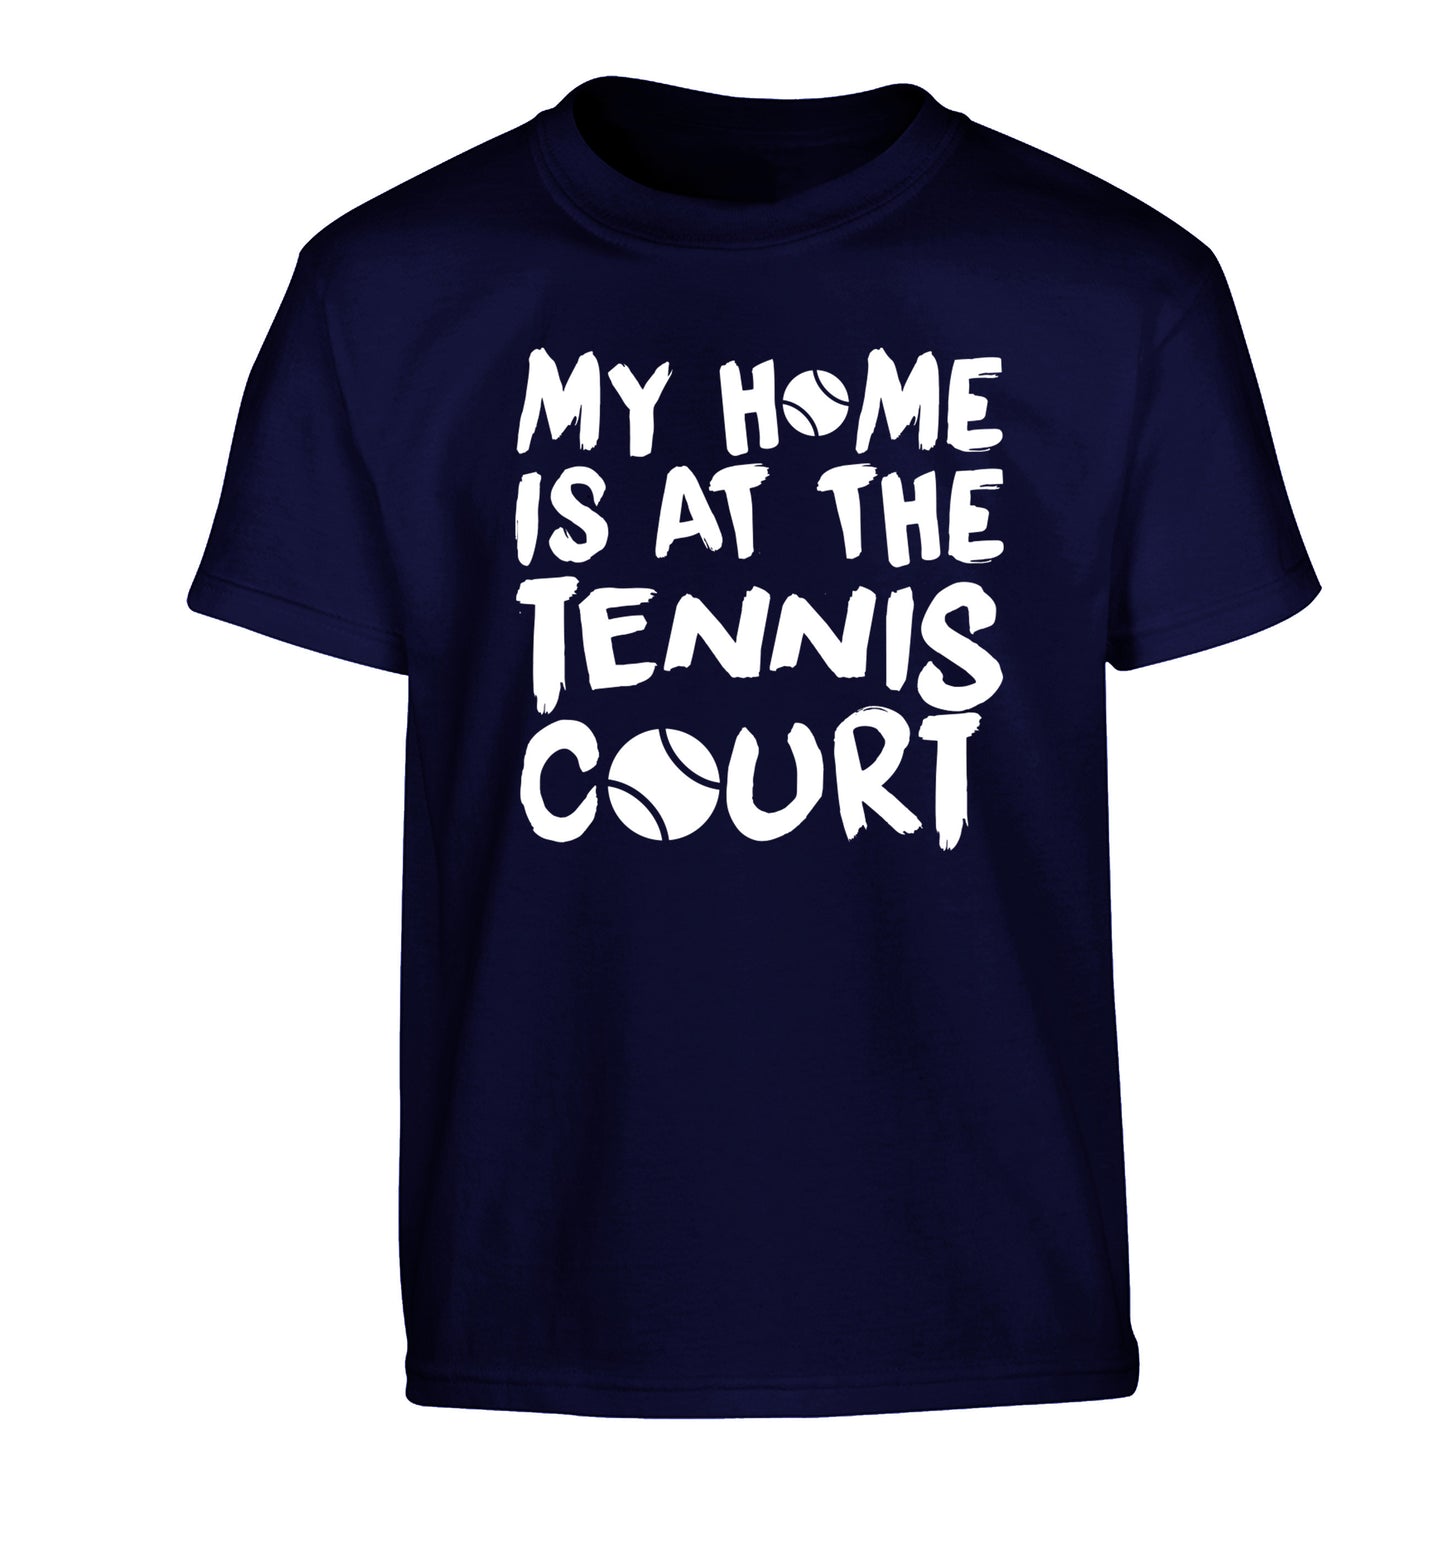 My home is at the tennis court Children's navy Tshirt 12-14 Years